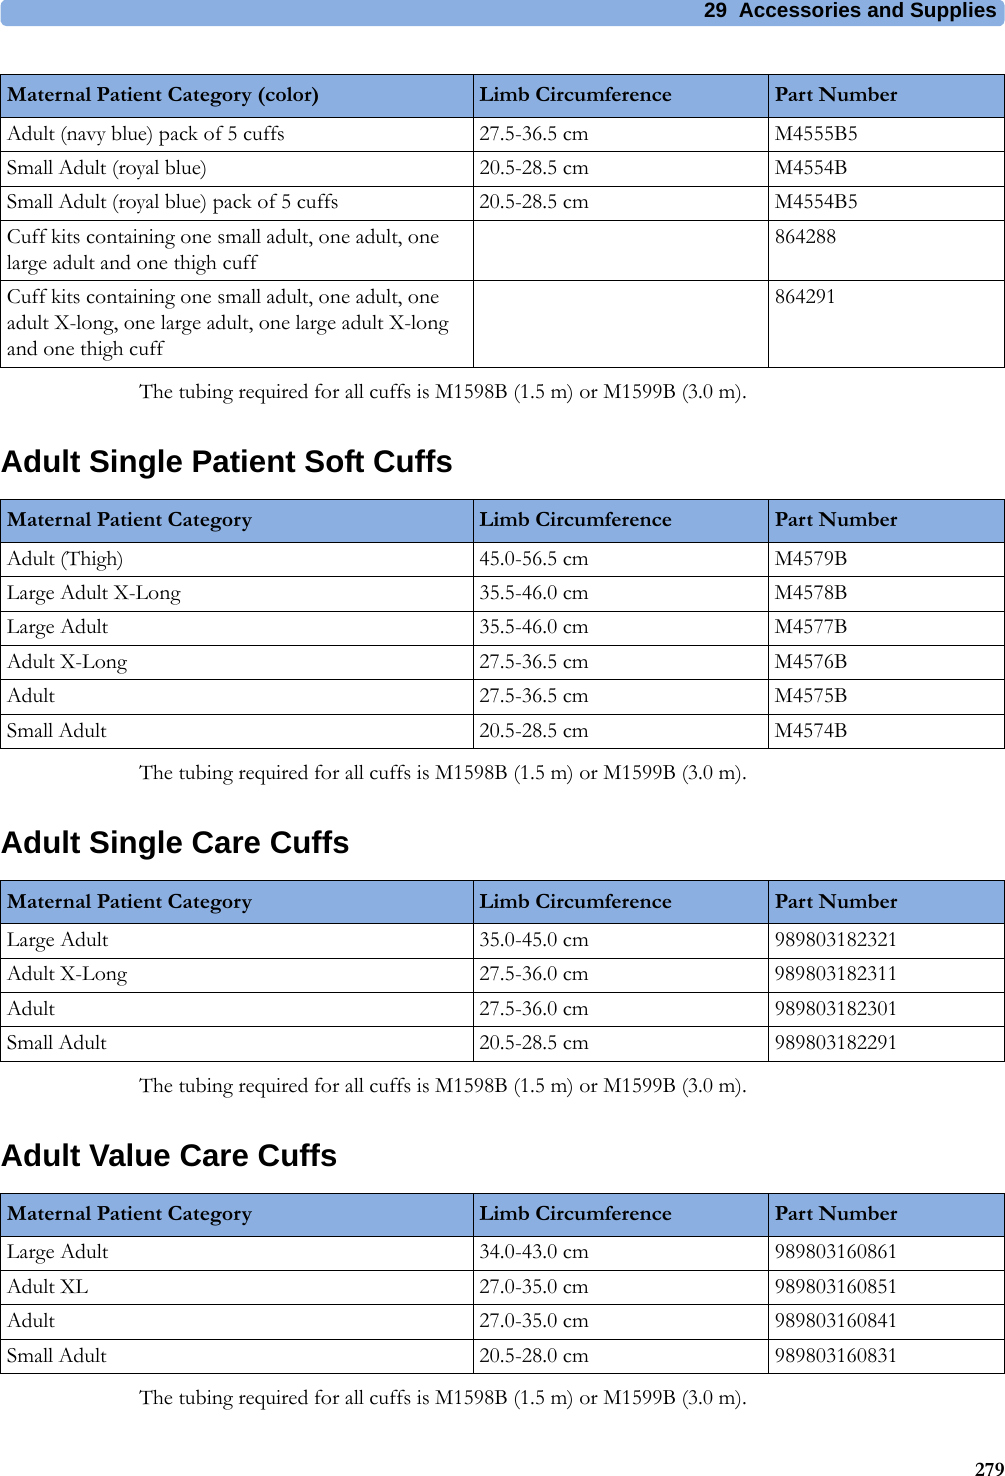 29  Accessories and Supplies279The tubing required for all cuffs is M1598B (1.5 m) or M1599B (3.0 m).Adult Single Patient Soft CuffsThe tubing required for all cuffs is M1598B (1.5 m) or M1599B (3.0 m).Adult Single Care CuffsThe tubing required for all cuffs is M1598B (1.5 m) or M1599B (3.0 m).Adult Value Care CuffsThe tubing required for all cuffs is M1598B (1.5 m) or M1599B (3.0 m).Adult (navy blue) pack of 5 cuffs 27.5-36.5 cm M4555B5Small Adult (royal blue) 20.5-28.5 cm M4554BSmall Adult (royal blue) pack of 5 cuffs 20.5-28.5 cm M4554B5Cuff kits containing one small adult, one adult, one large adult and one thigh cuff864288Cuff kits containing one small adult, one adult, one adult X-long, one large adult, one large adult X-long and one thigh cuff864291Maternal Patient Category (color) Limb Circumference Part NumberMaternal Patient Category Limb Circumference Part NumberAdult (Thigh) 45.0-56.5 cm M4579BLarge Adult X-Long 35.5-46.0 cm M4578BLarge Adult 35.5-46.0 cm M4577BAdult X-Long 27.5-36.5 cm M4576BAdult 27.5-36.5 cm M4575BSmall Adult 20.5-28.5 cm M4574BMaternal Patient Category Limb Circumference Part NumberLarge Adult 35.0-45.0 cm 989803182321Adult X-Long 27.5-36.0 cm 989803182311Adult 27.5-36.0 cm 989803182301Small Adult 20.5-28.5 cm 989803182291Maternal Patient Category Limb Circumference Part NumberLarge Adult 34.0-43.0 cm 989803160861Adult XL 27.0-35.0 cm 989803160851Adult 27.0-35.0 cm 989803160841Small Adult 20.5-28.0 cm 989803160831